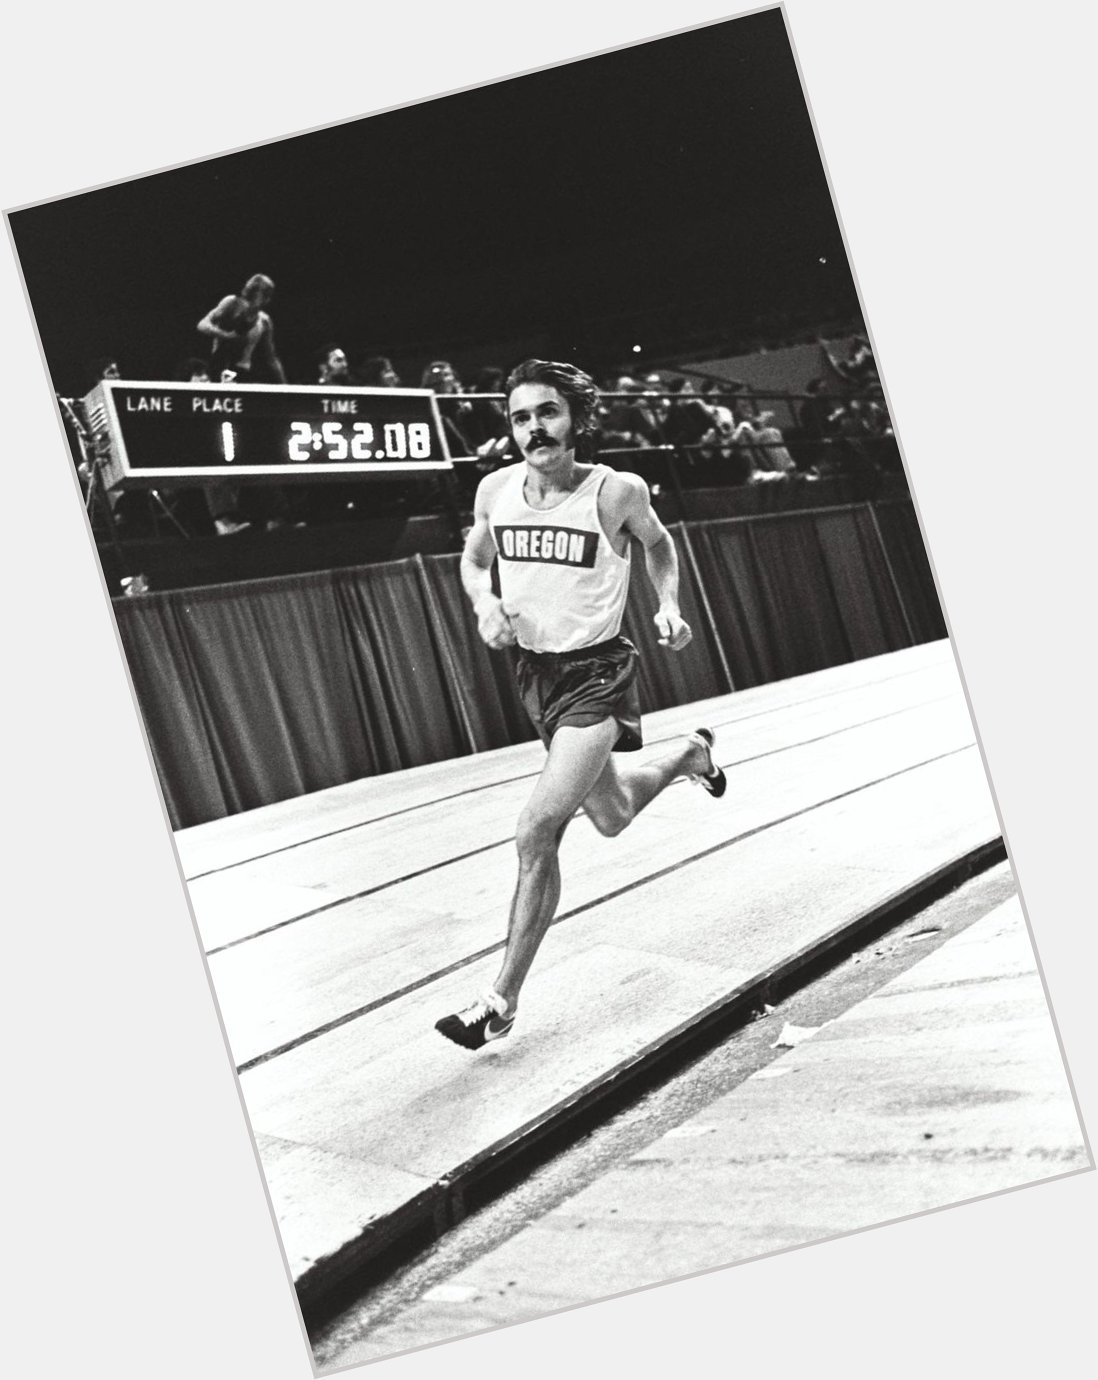 Happy Birthday to the Late and Great Steve Prefontaine. My biggest inspiration when it comes to distance running 